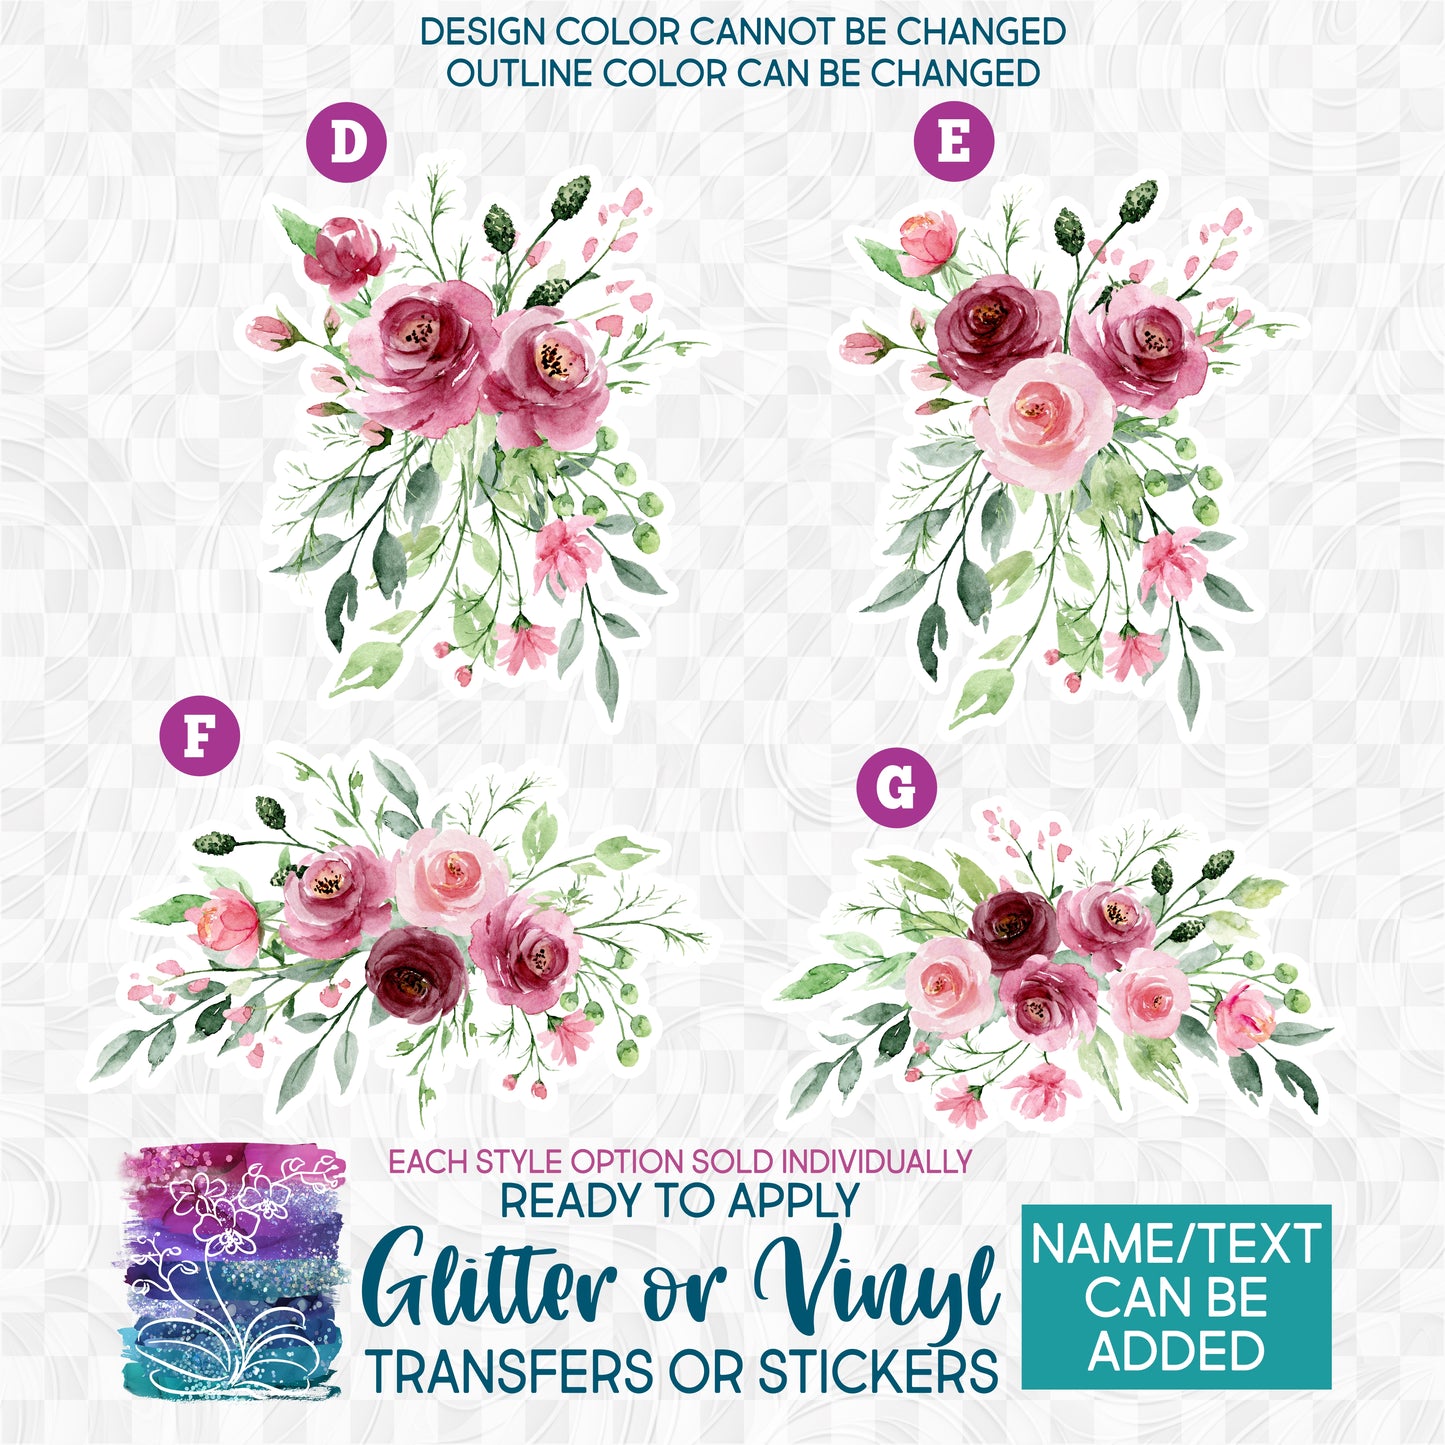 (s214) Watercolor Burgundy Pink Roses Flowers Glitter or Vinyl Iron-On Transfer or Sticker